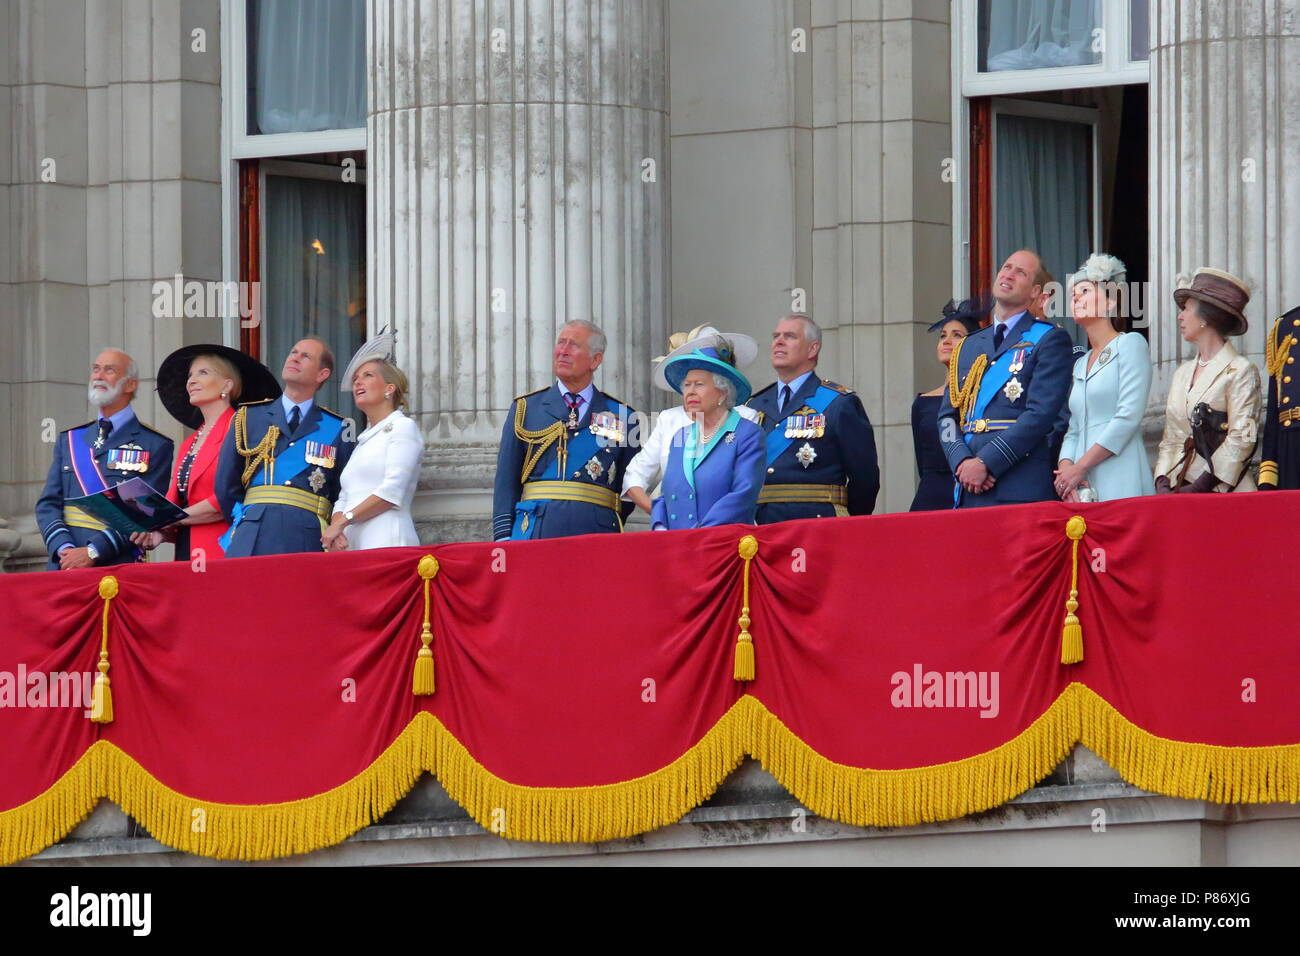 London, UK. 10th July 2018. The Royal Family watches the spectacular flypast of 100 aircraft from all aviation periods to mark 100 years of the Royal Air Force from the balcony of Buckingham Palace. Credit: Uwe Deffner/Alamy Live News Stock Photo